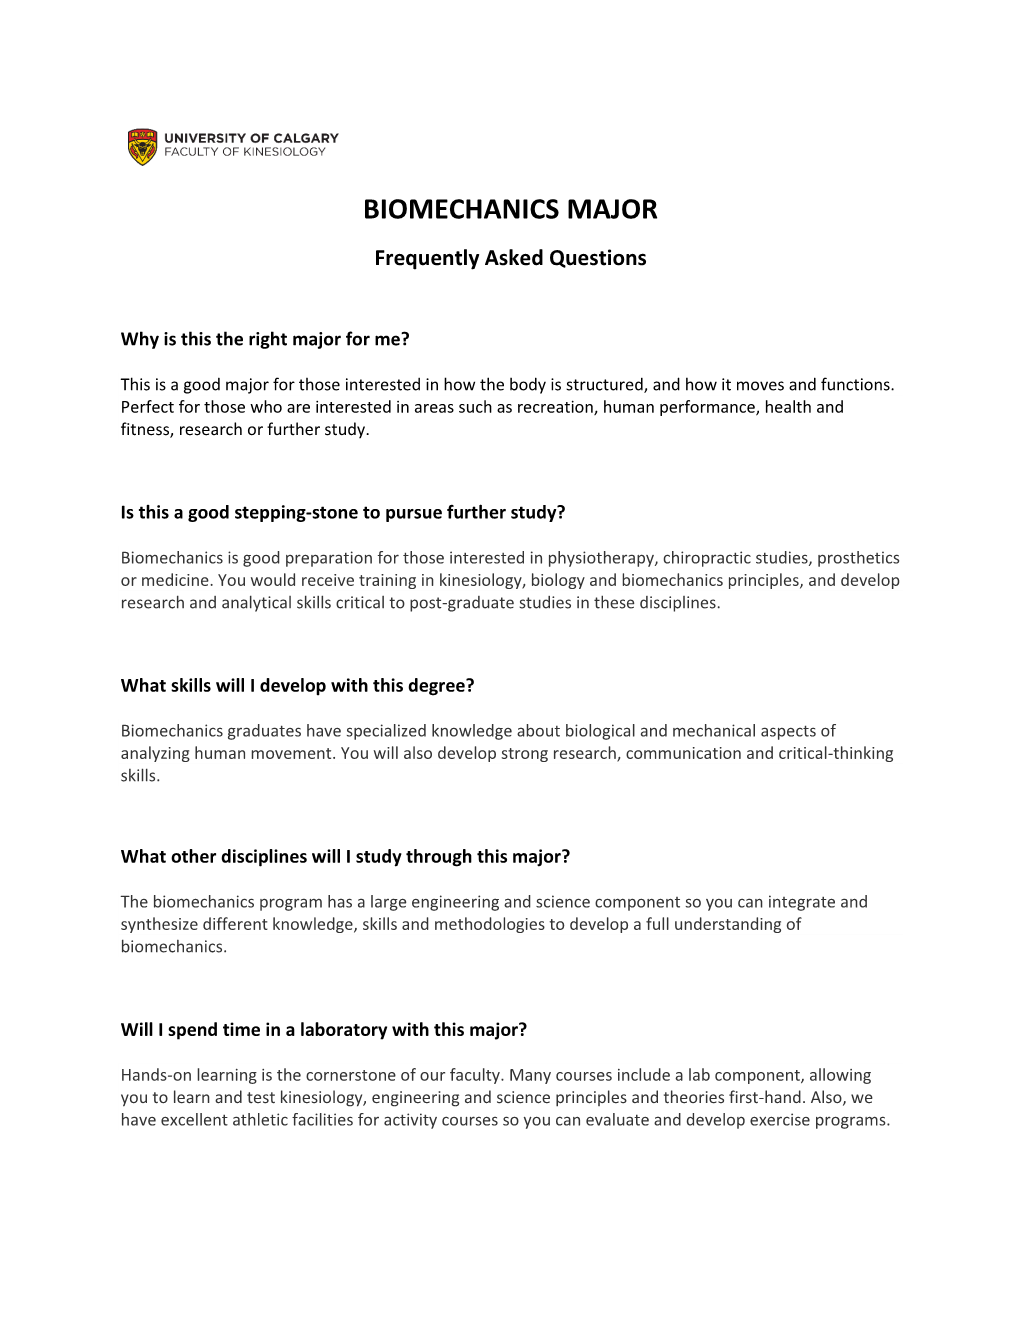 BIOMECHANICS MAJOR Frequently Asked Questions